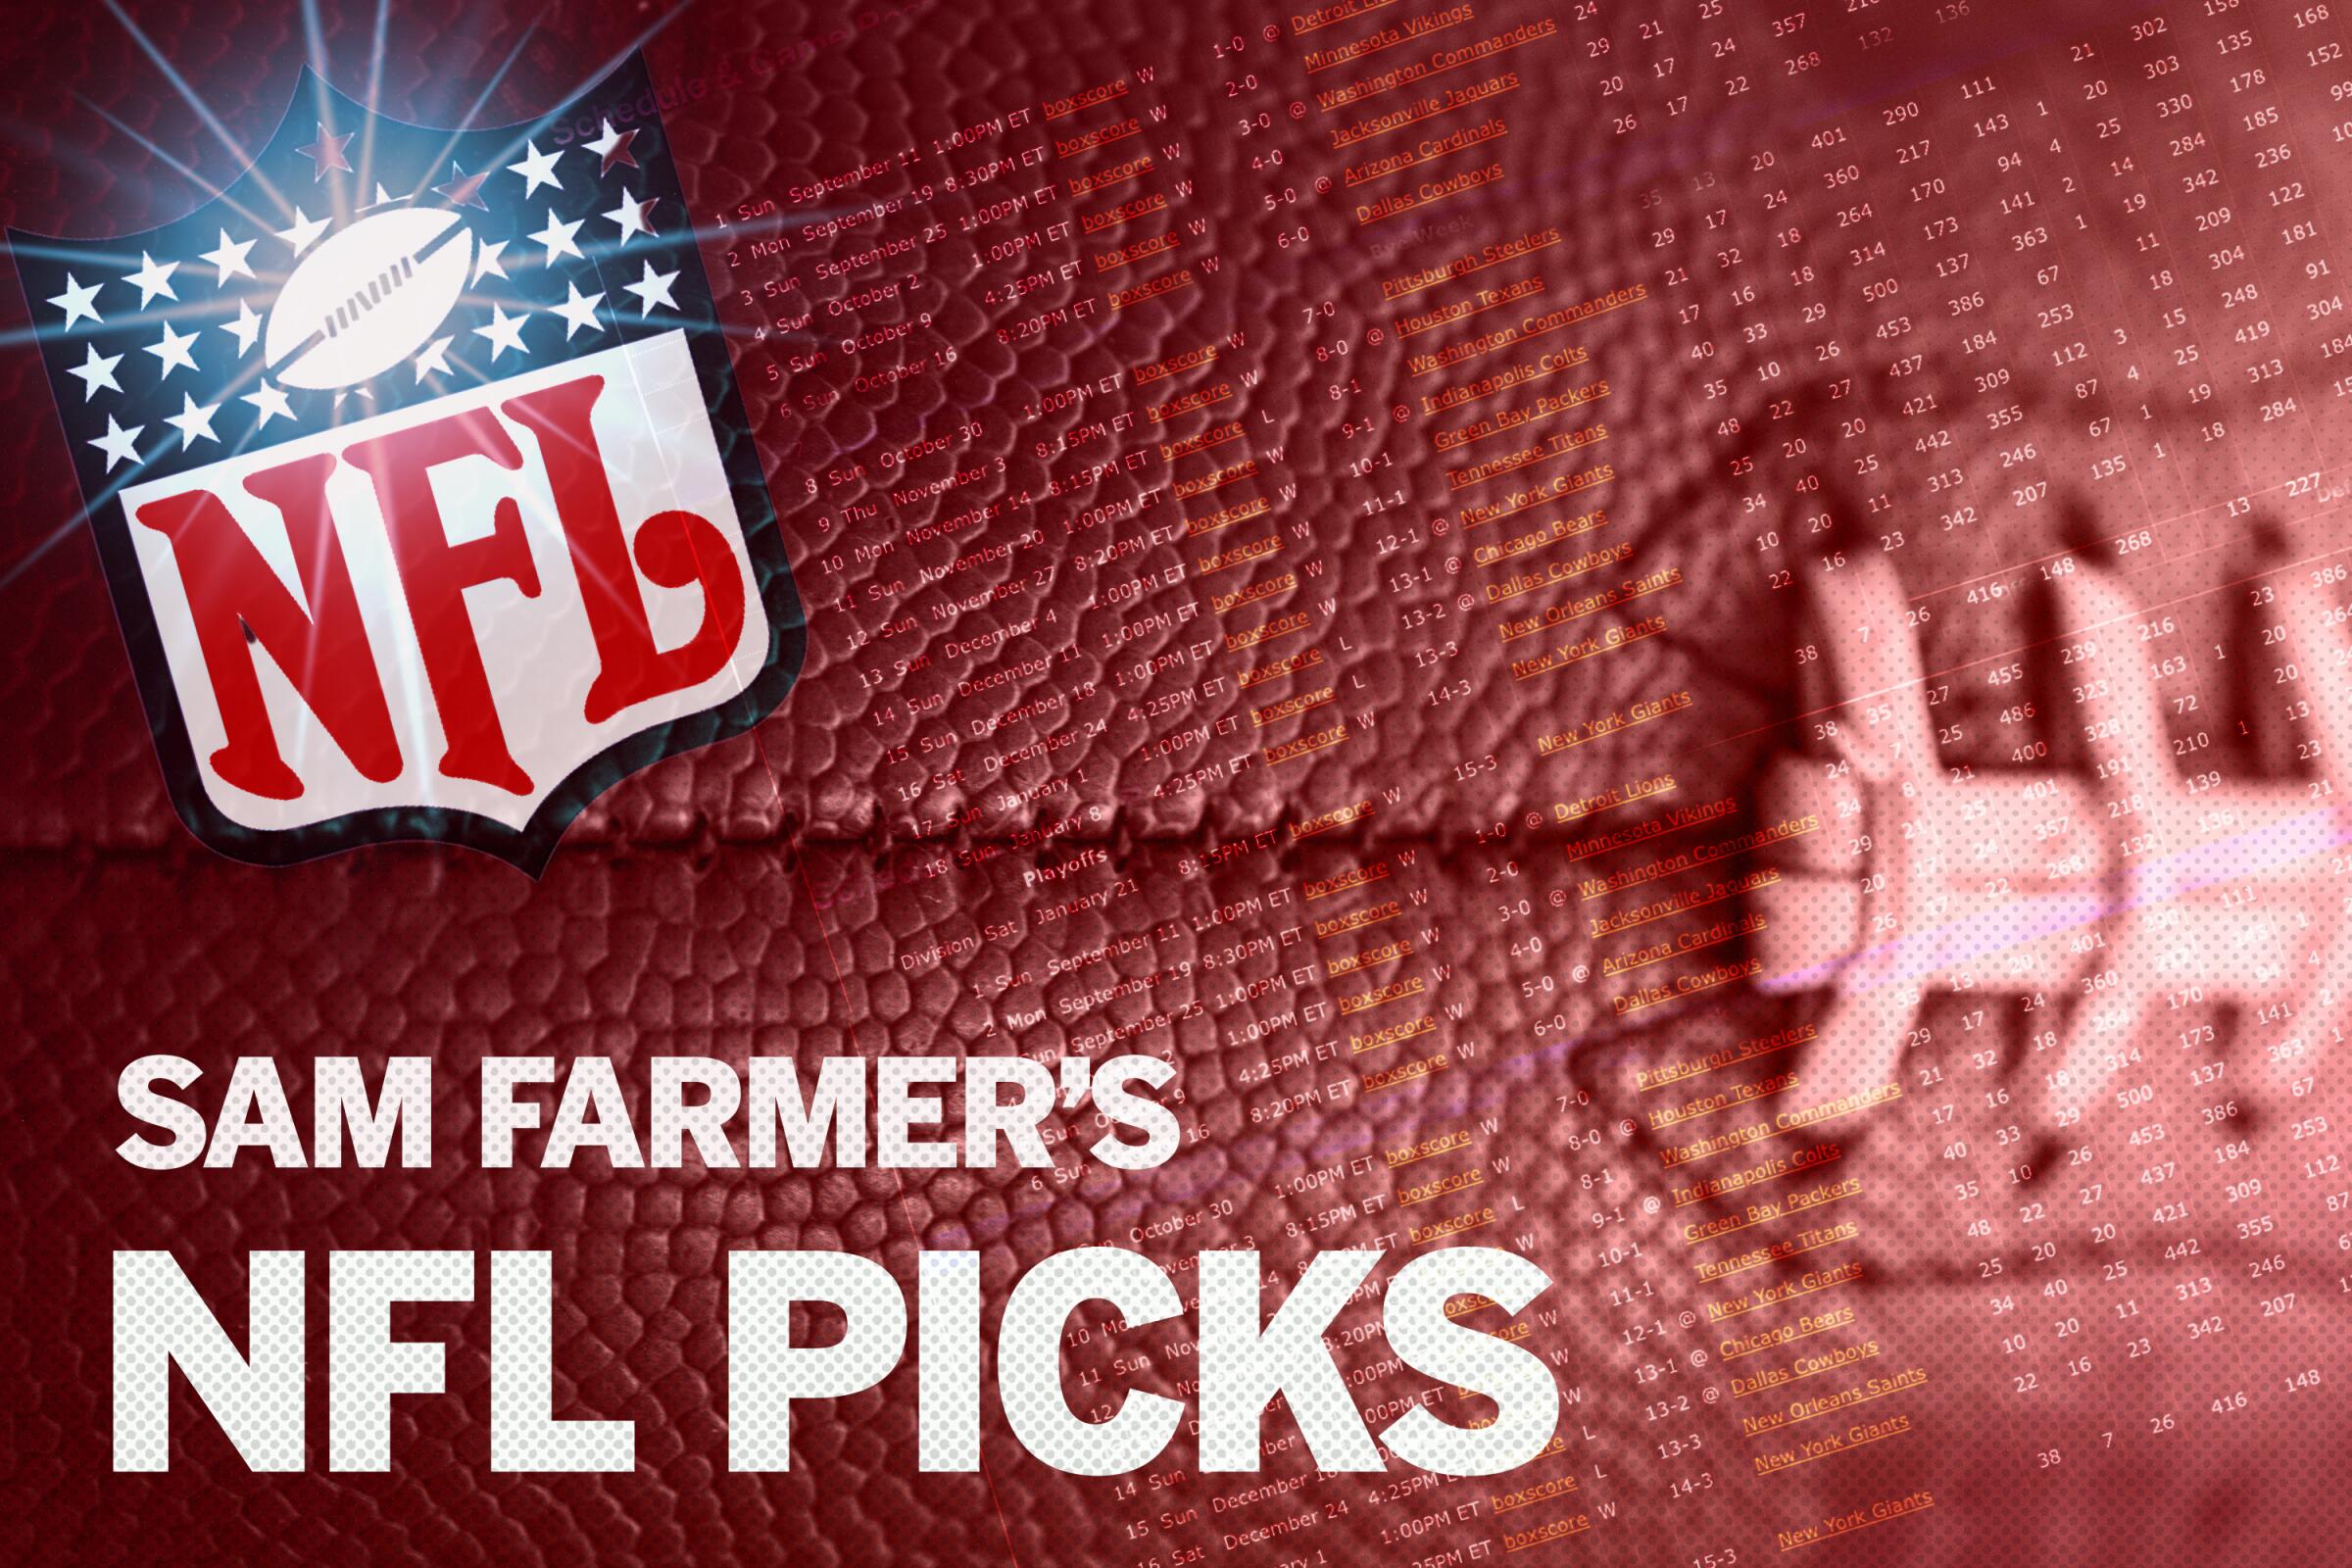 NFL Week 2 picks: Can Rams upset 49ers? Chargers or Titans 0-2